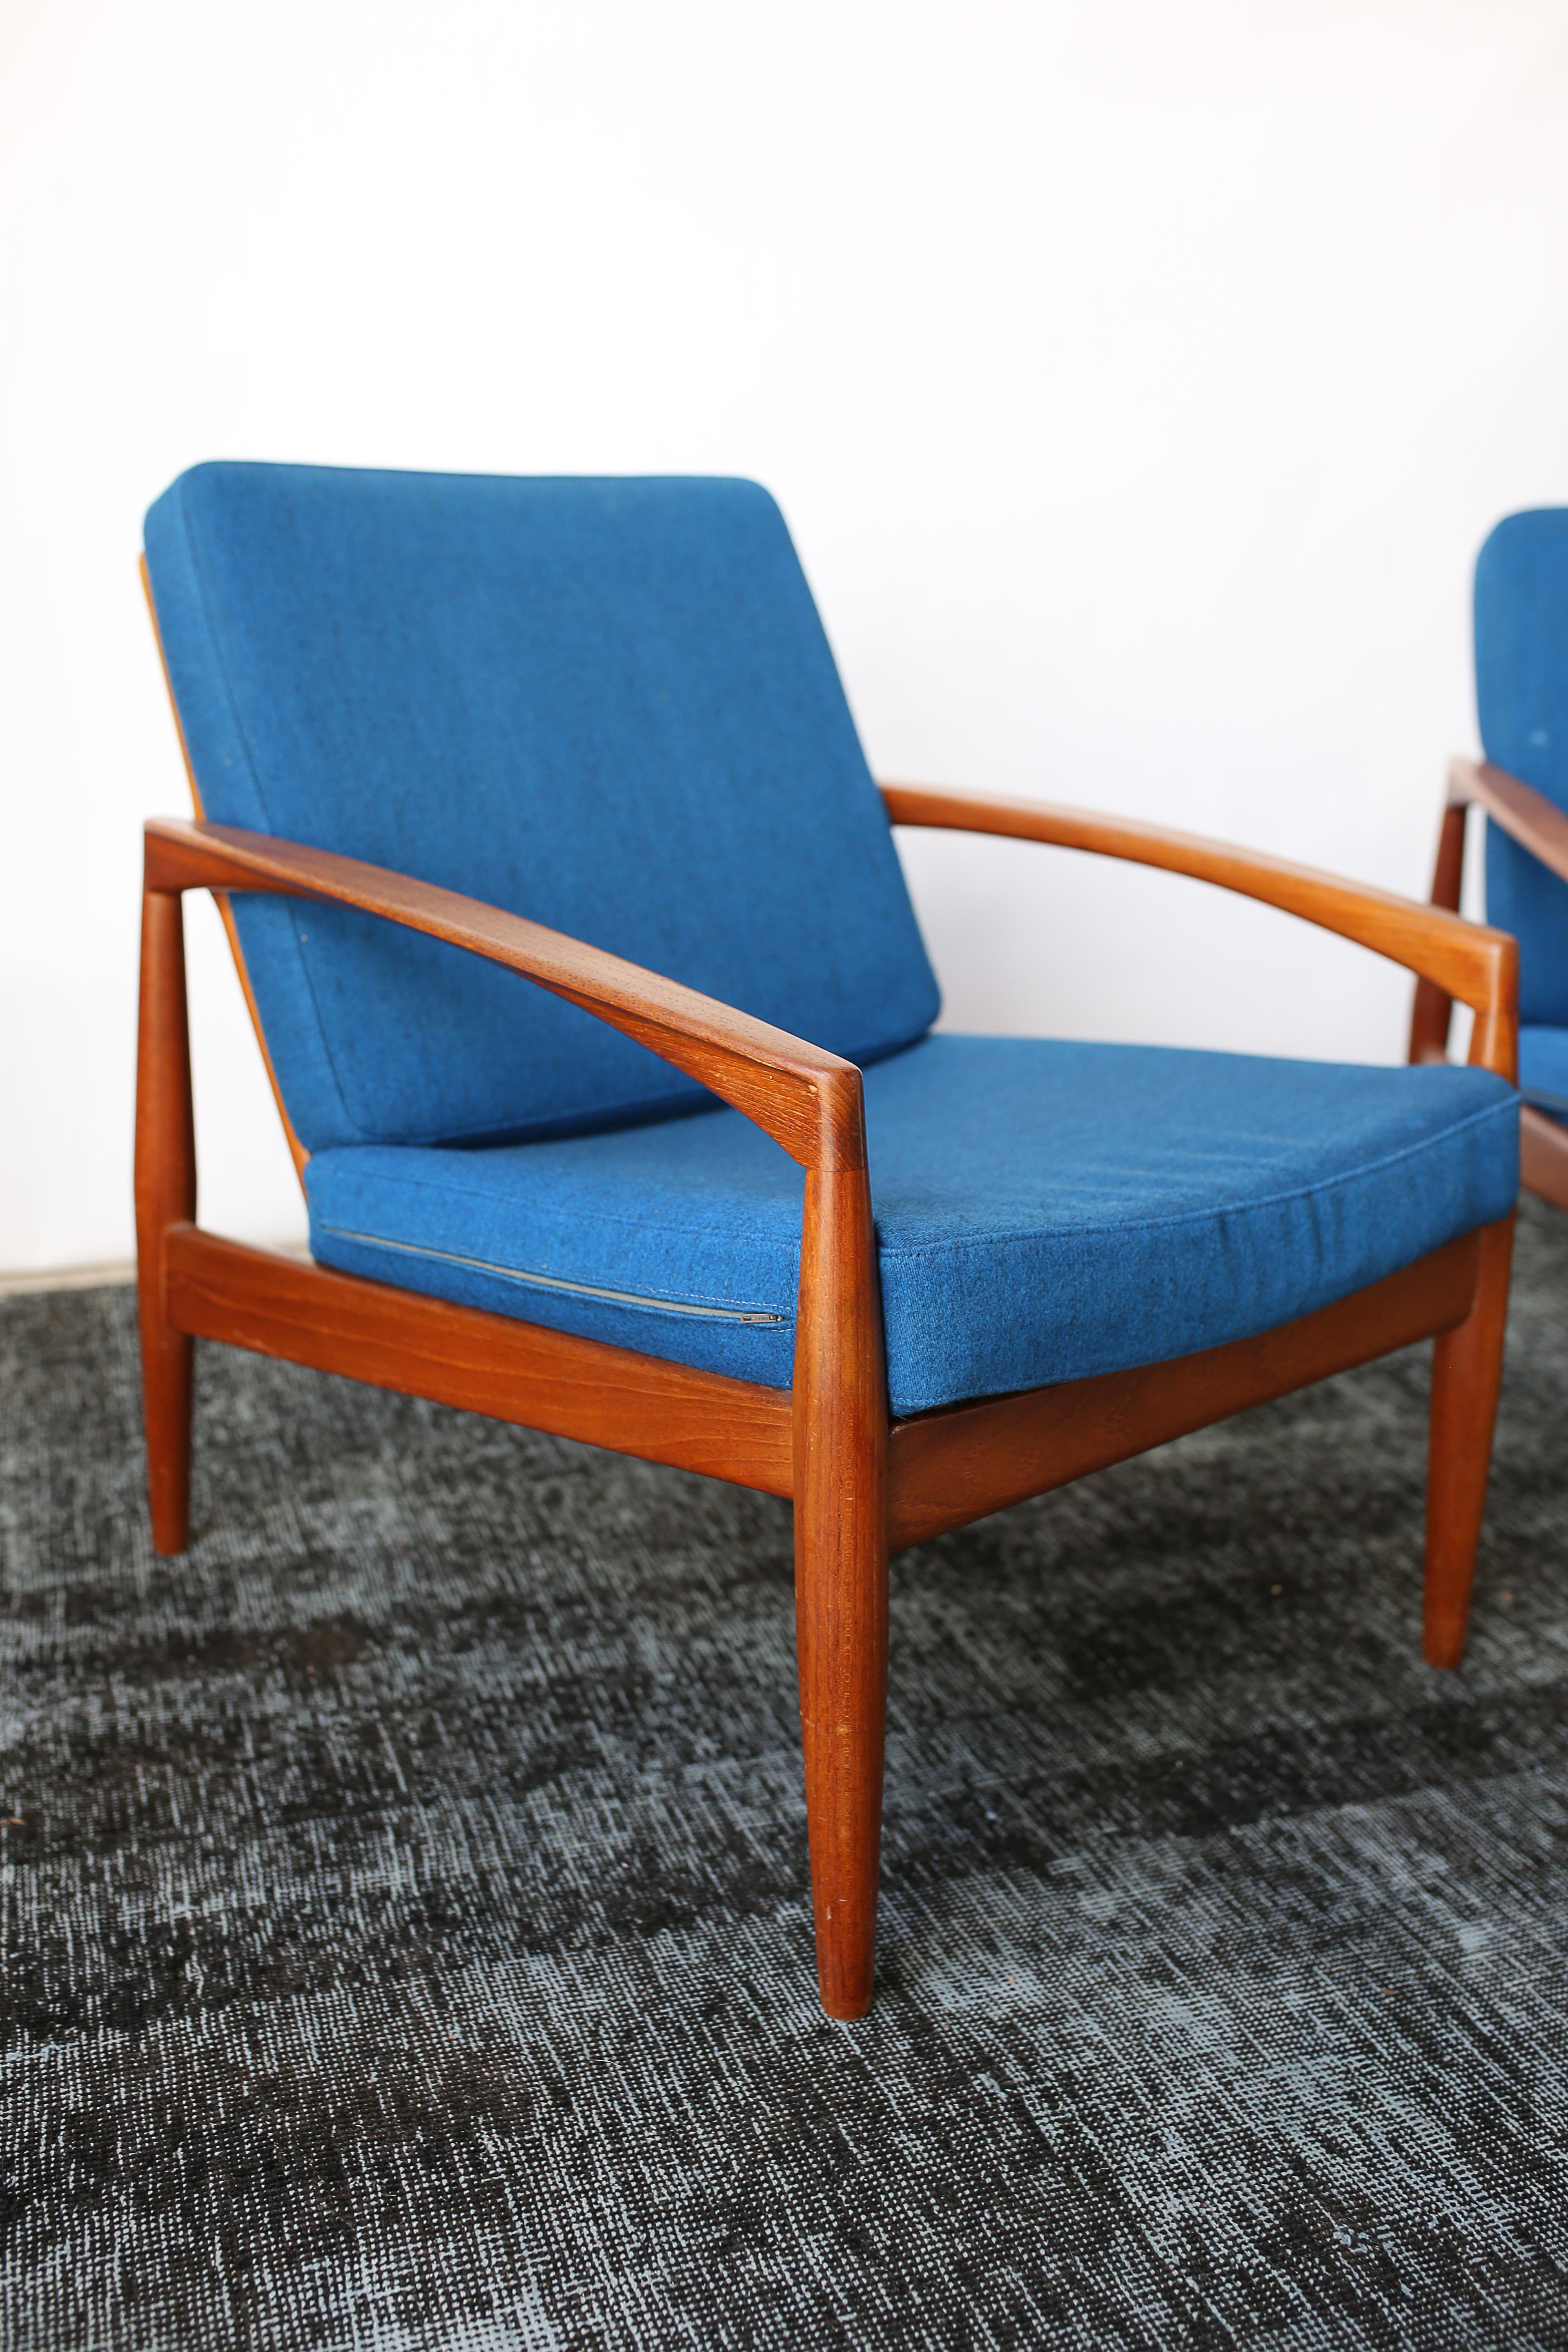 Wool Pair of Solid Teak 'Paper Knife' Lounge Chairs by Kai Kristiansen, 1955